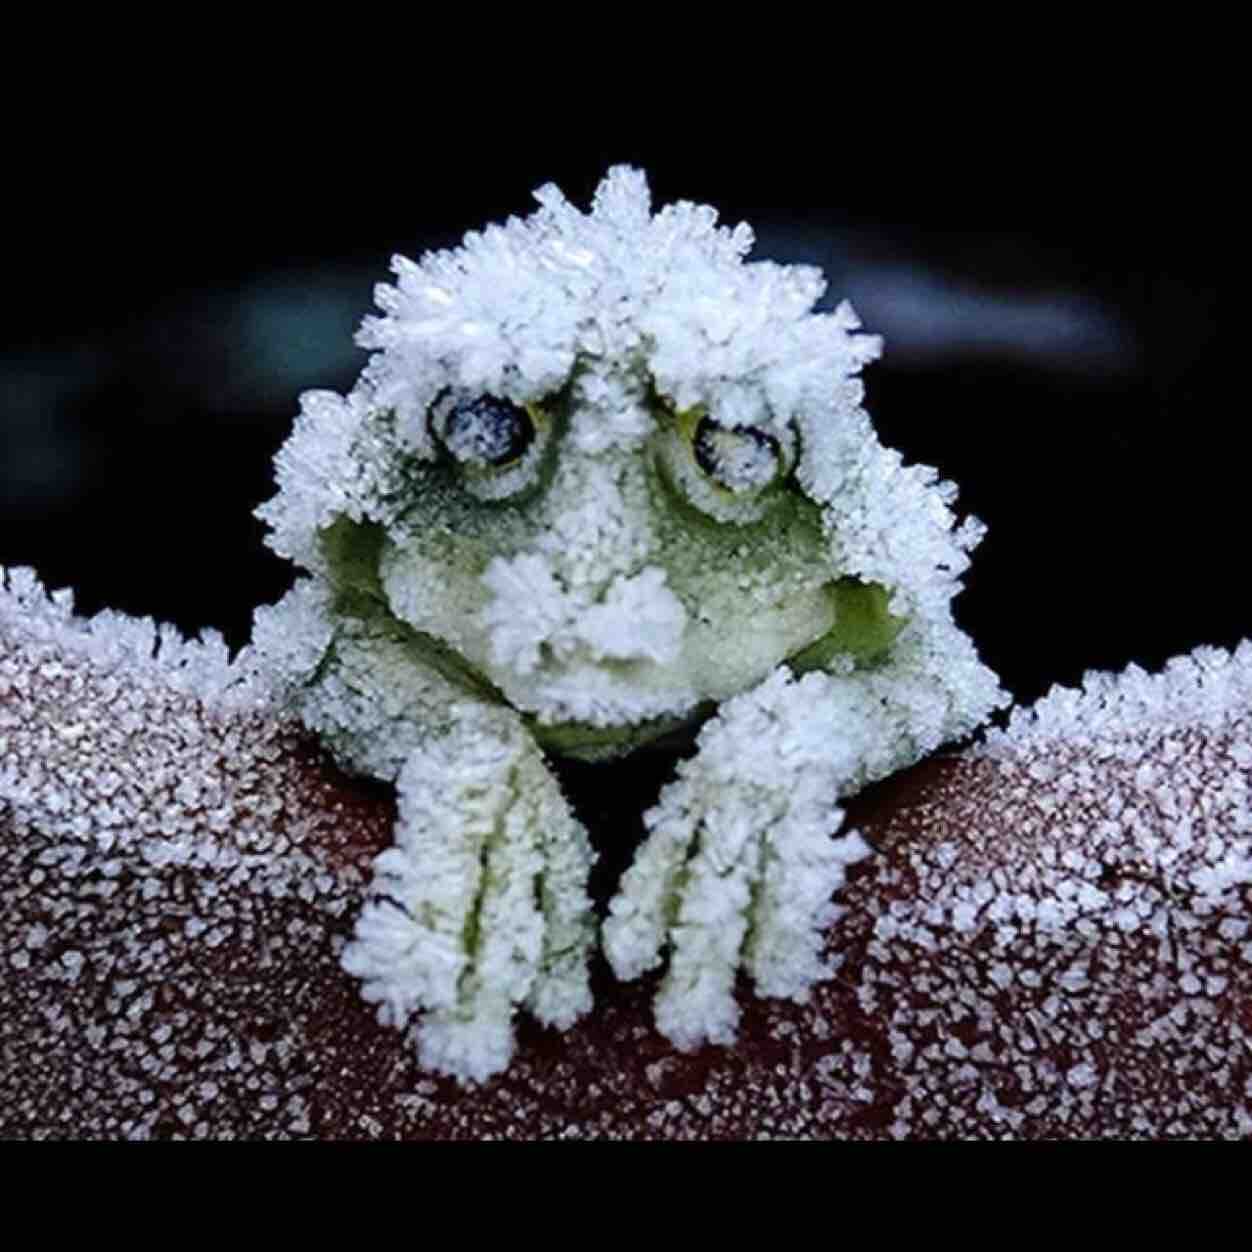 Frozen frog that will thaw and come back to life after winter.